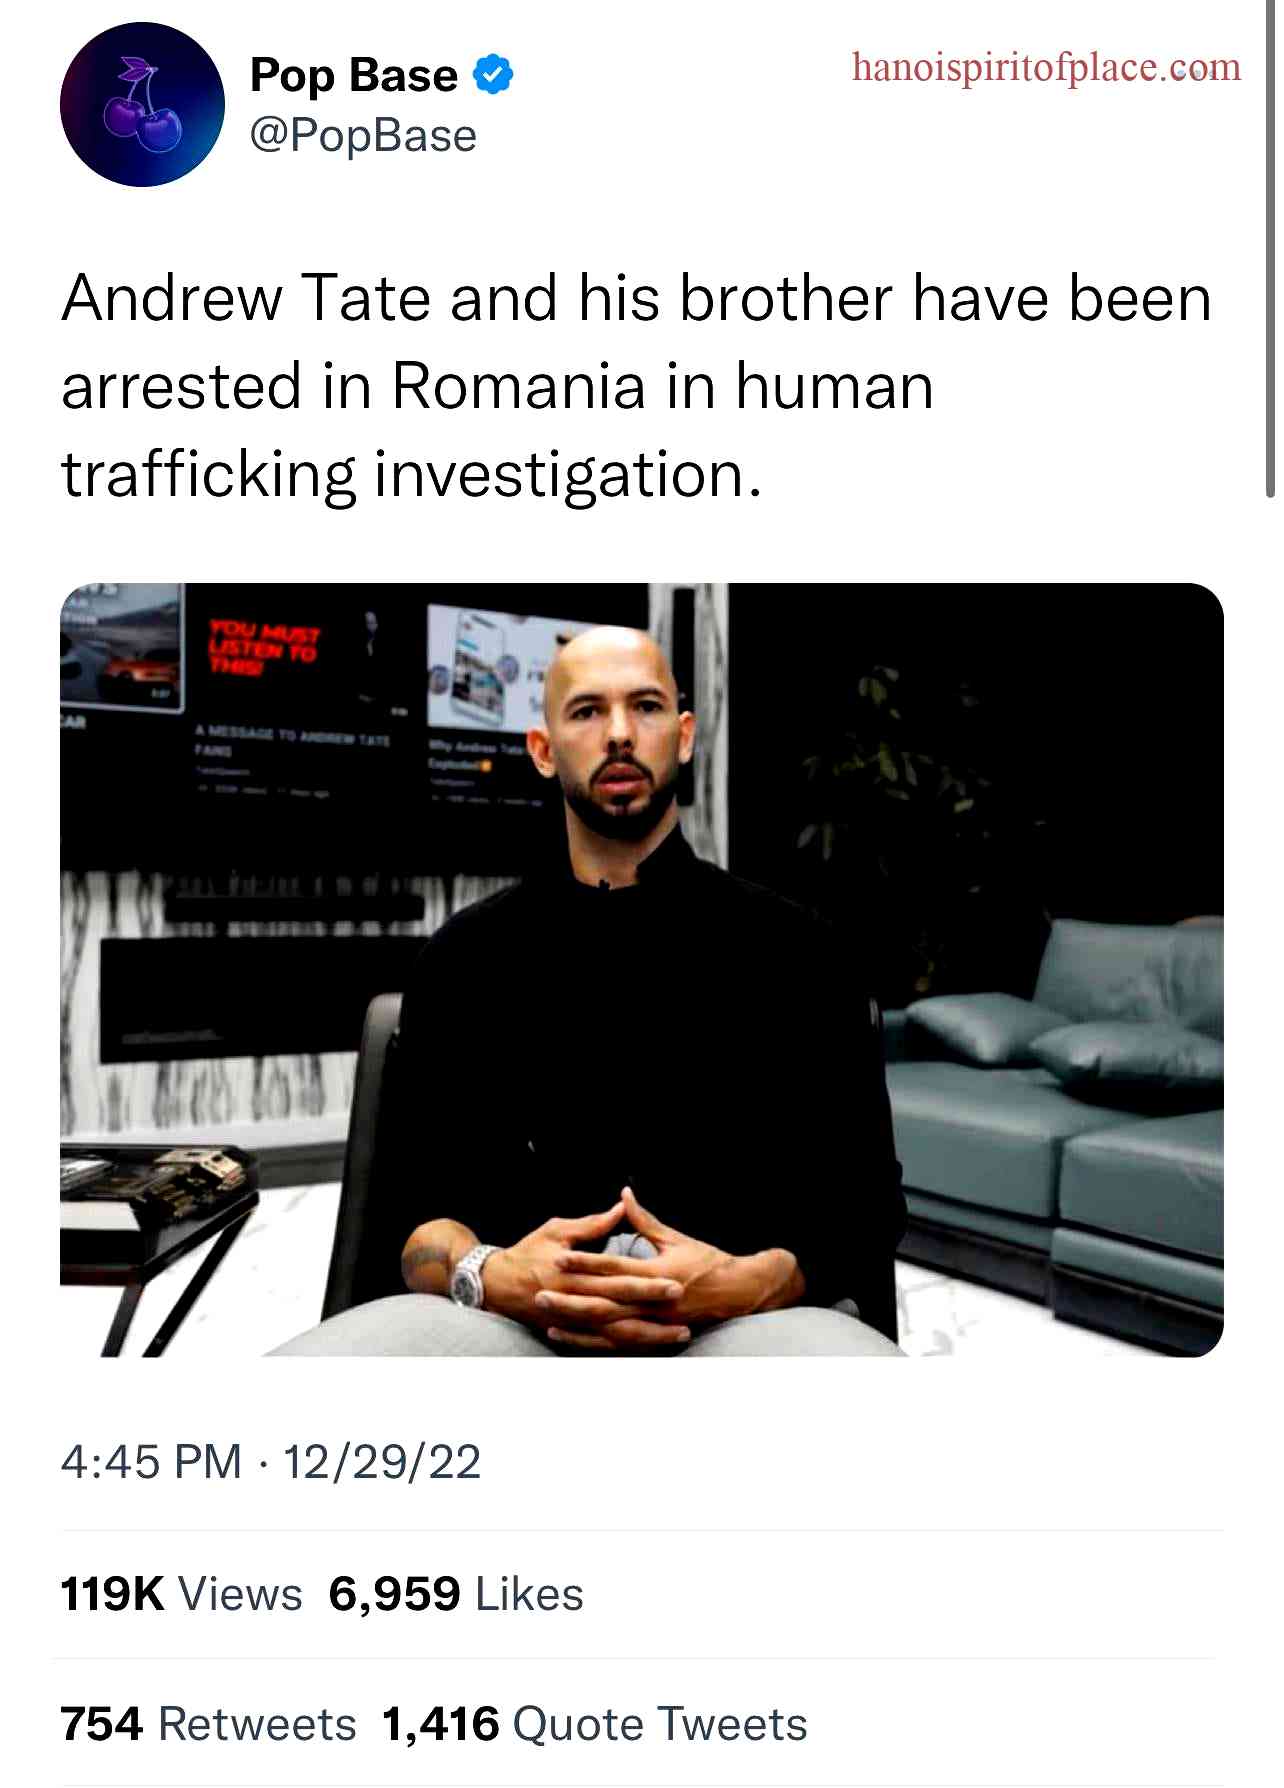 Overview of Andrew Tate's career and background